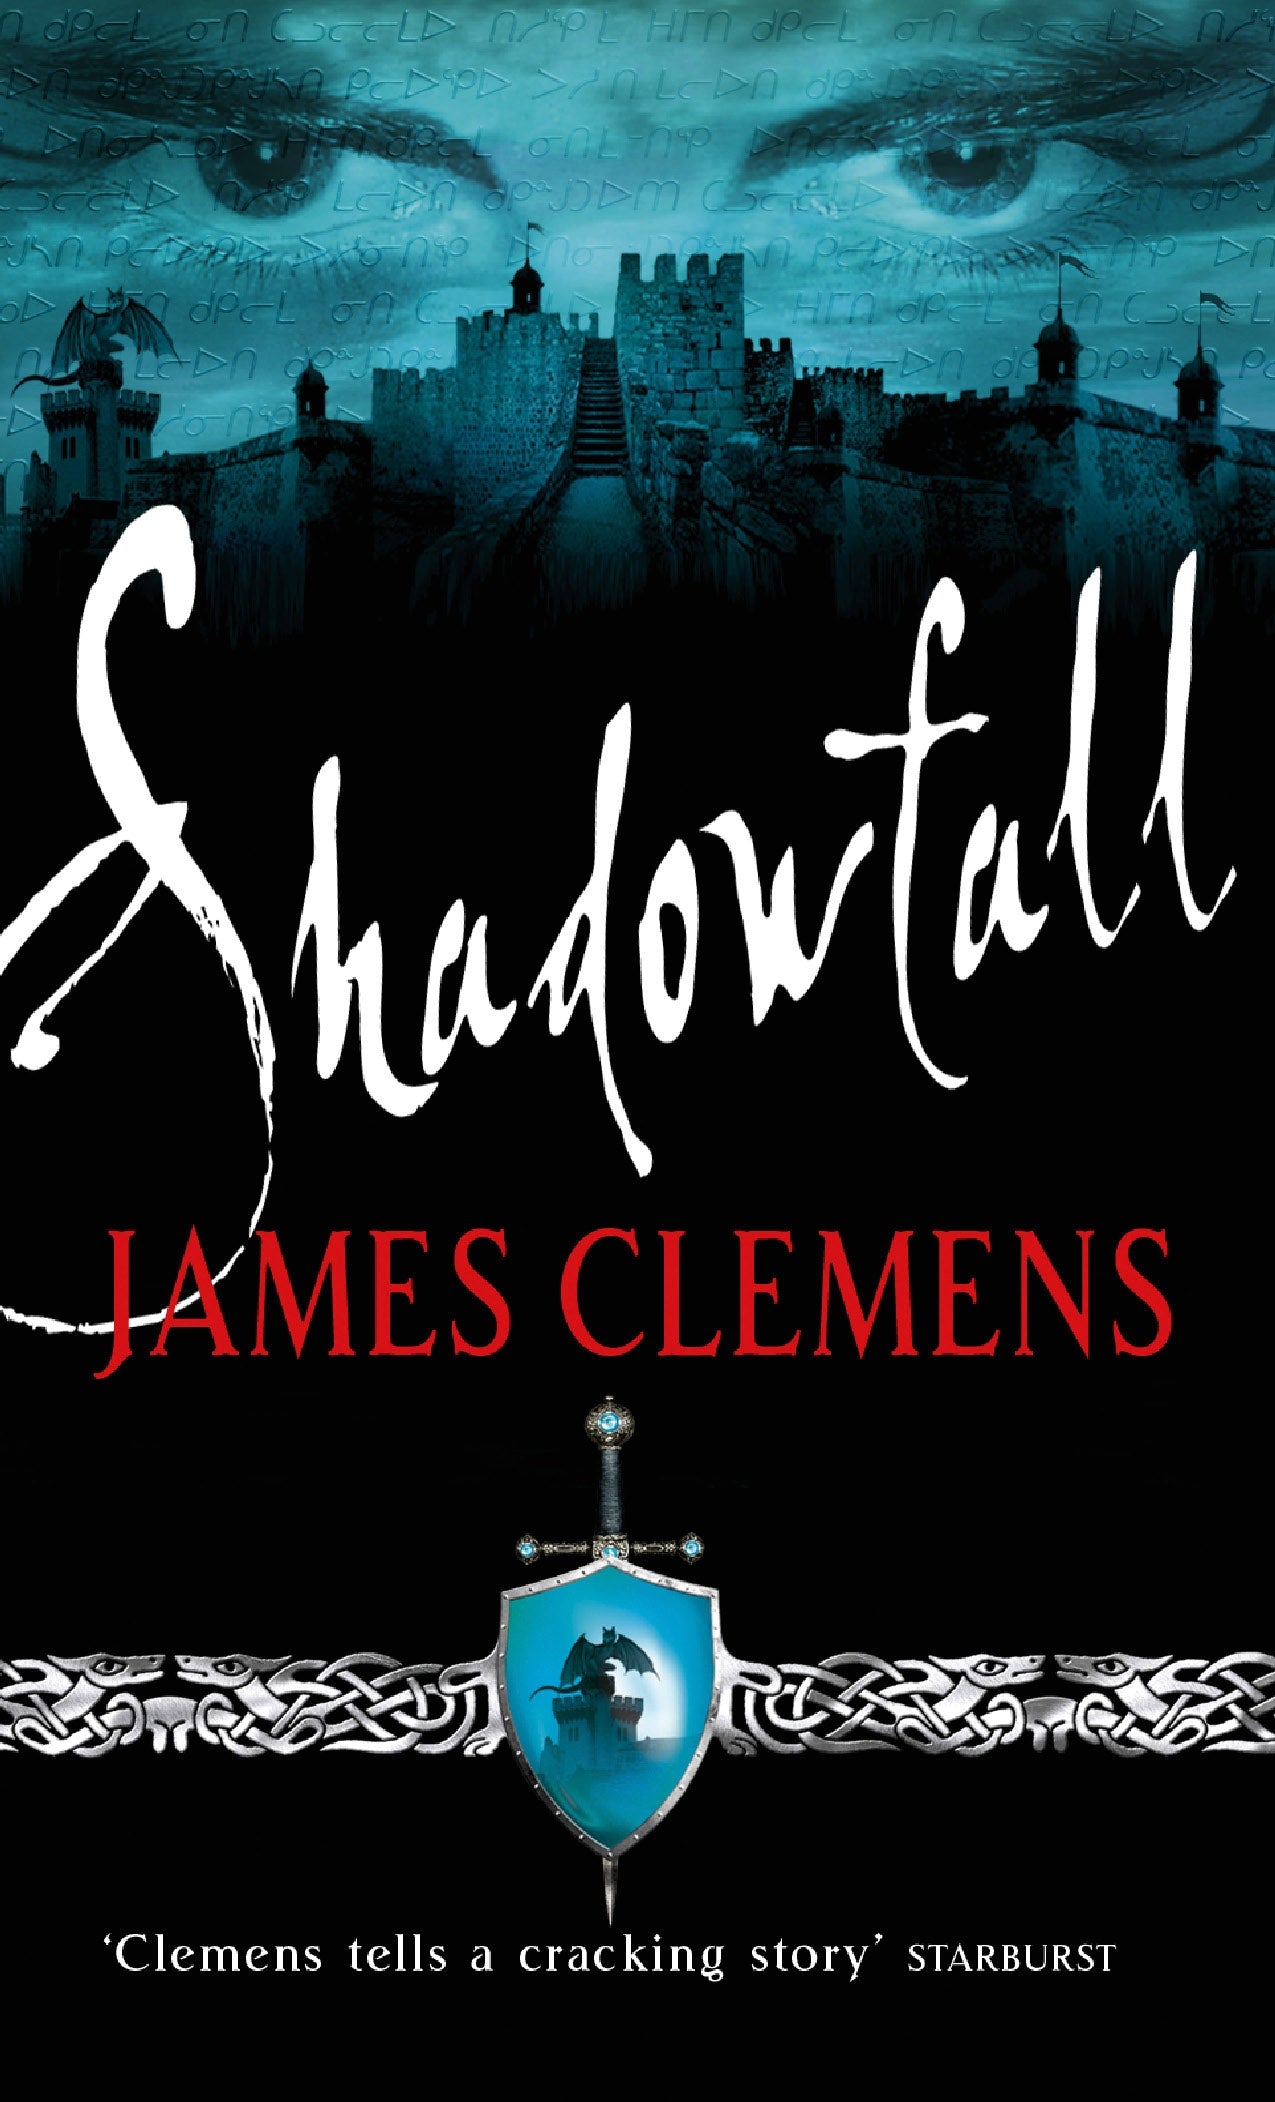 Shadowfall by James Clemens